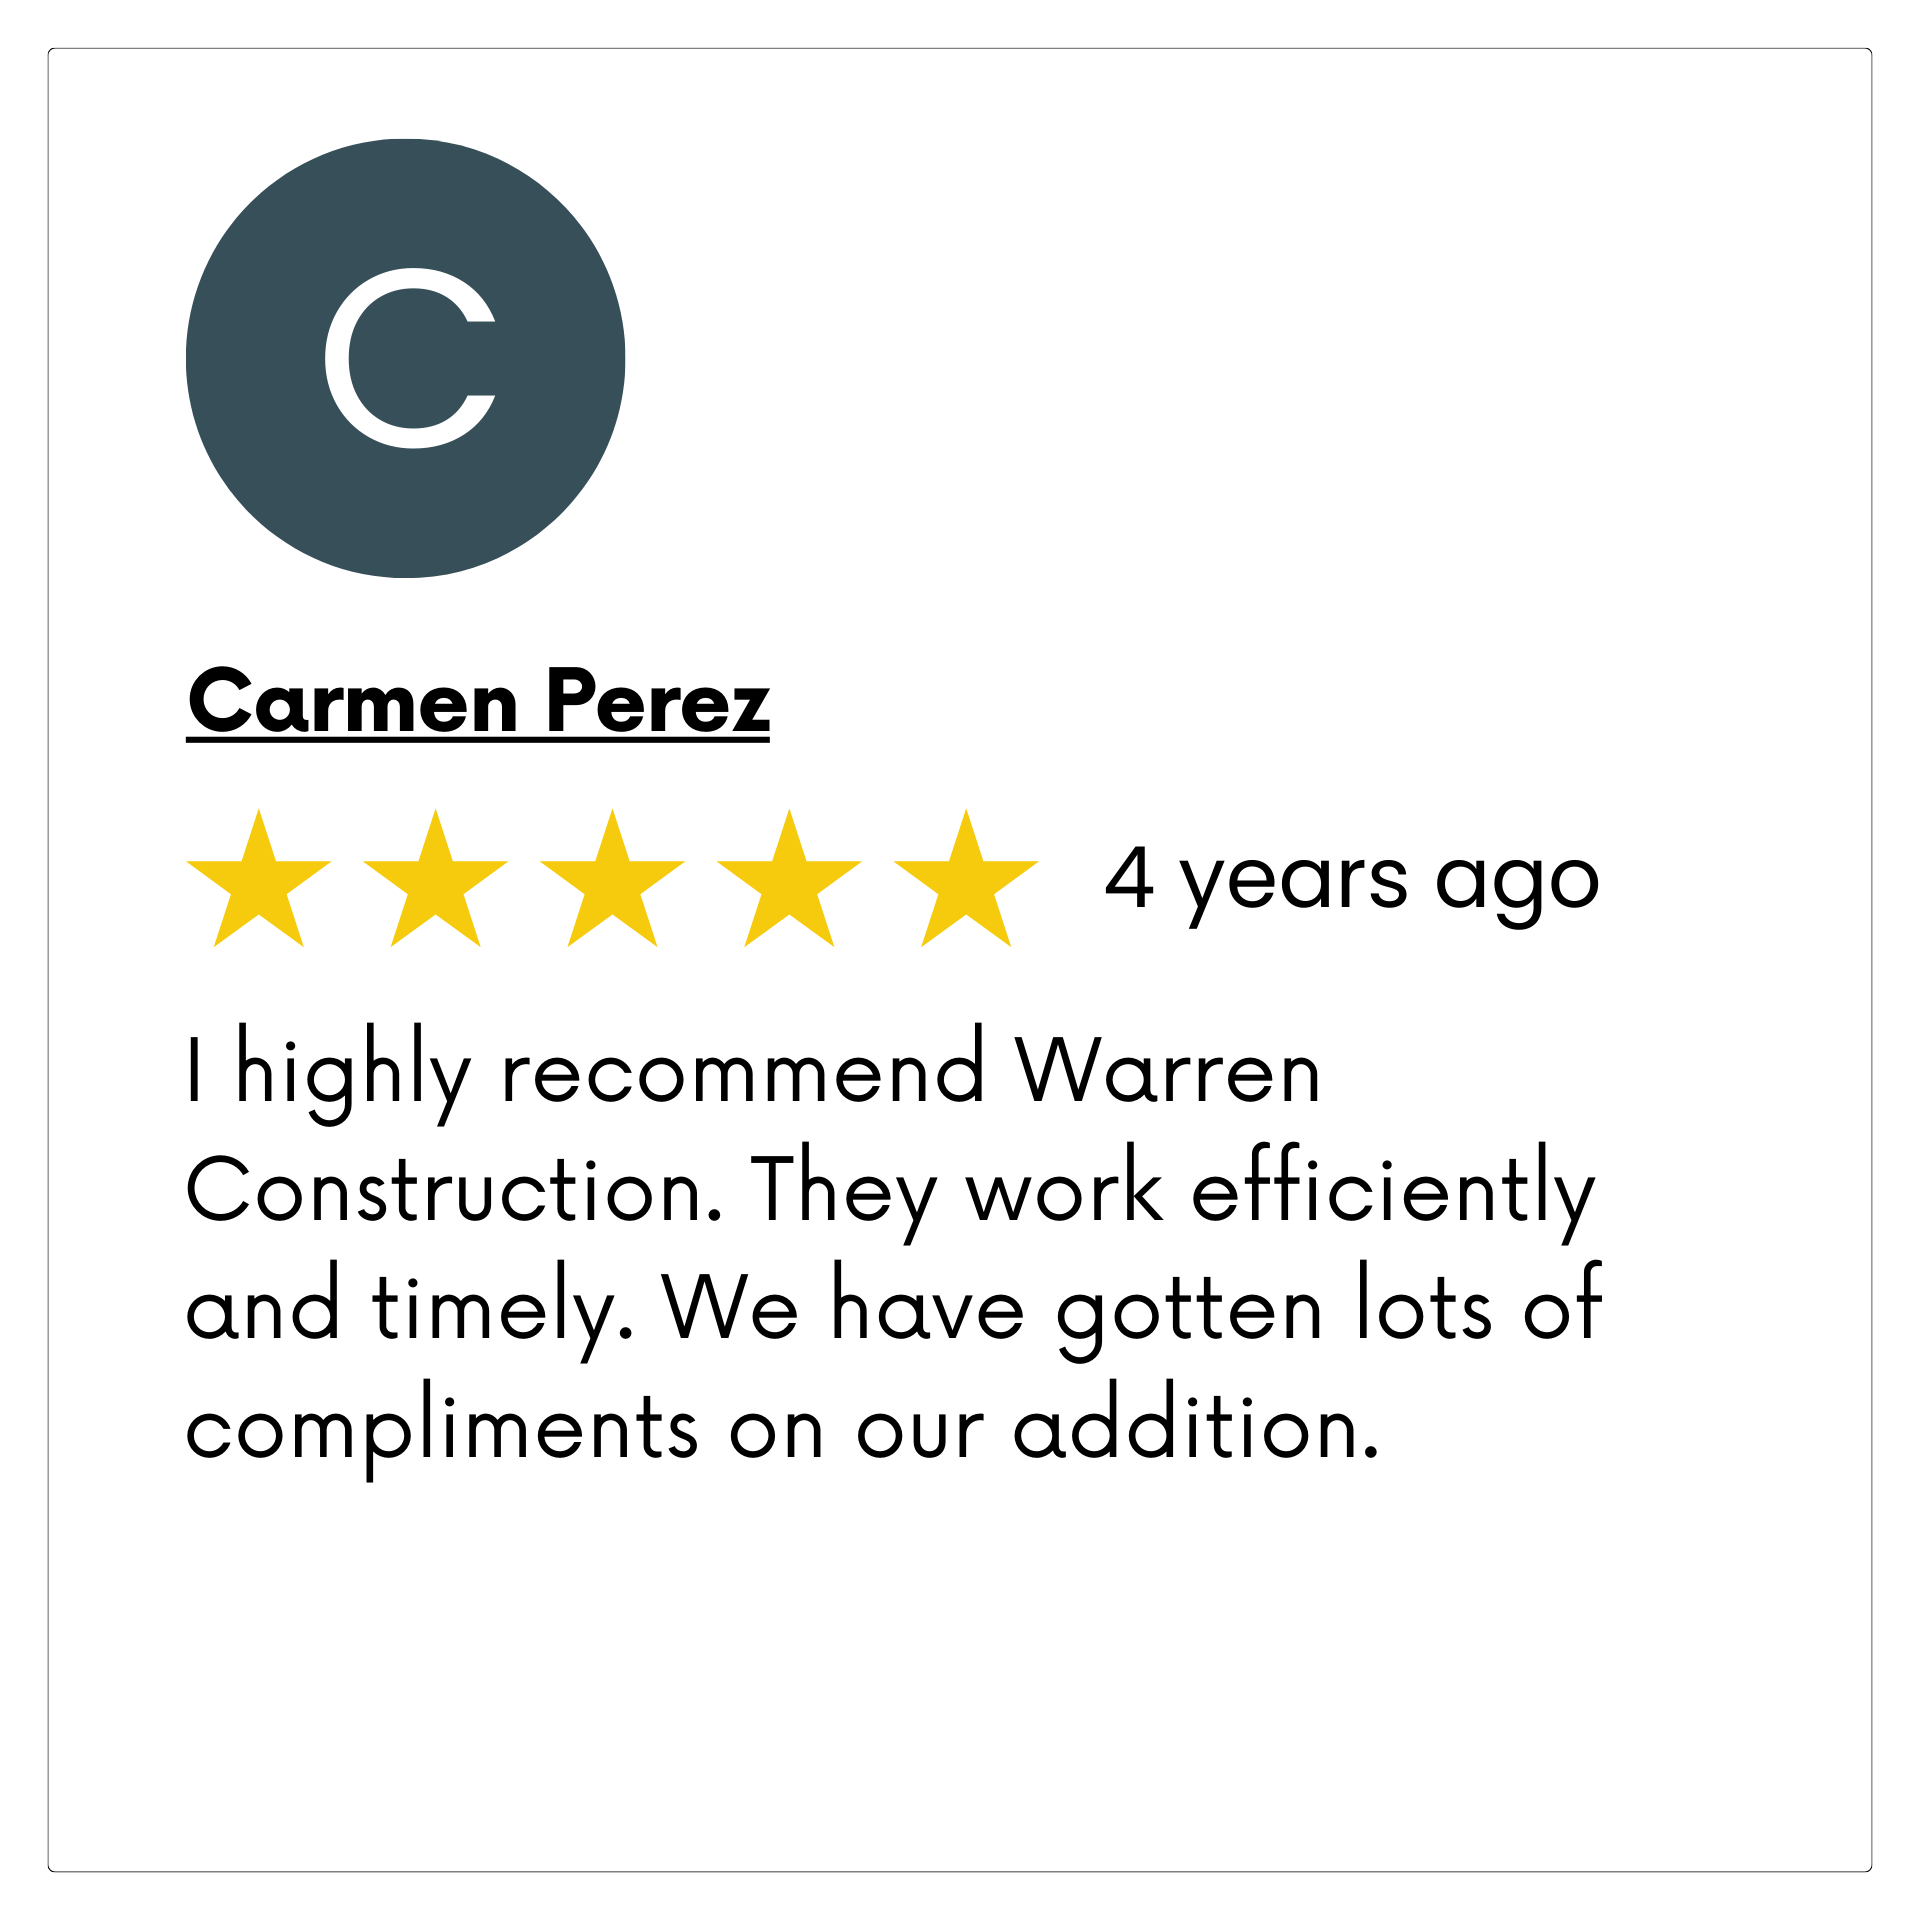 Carmen perez highly recommends warren construction . they work efficiently and timely.